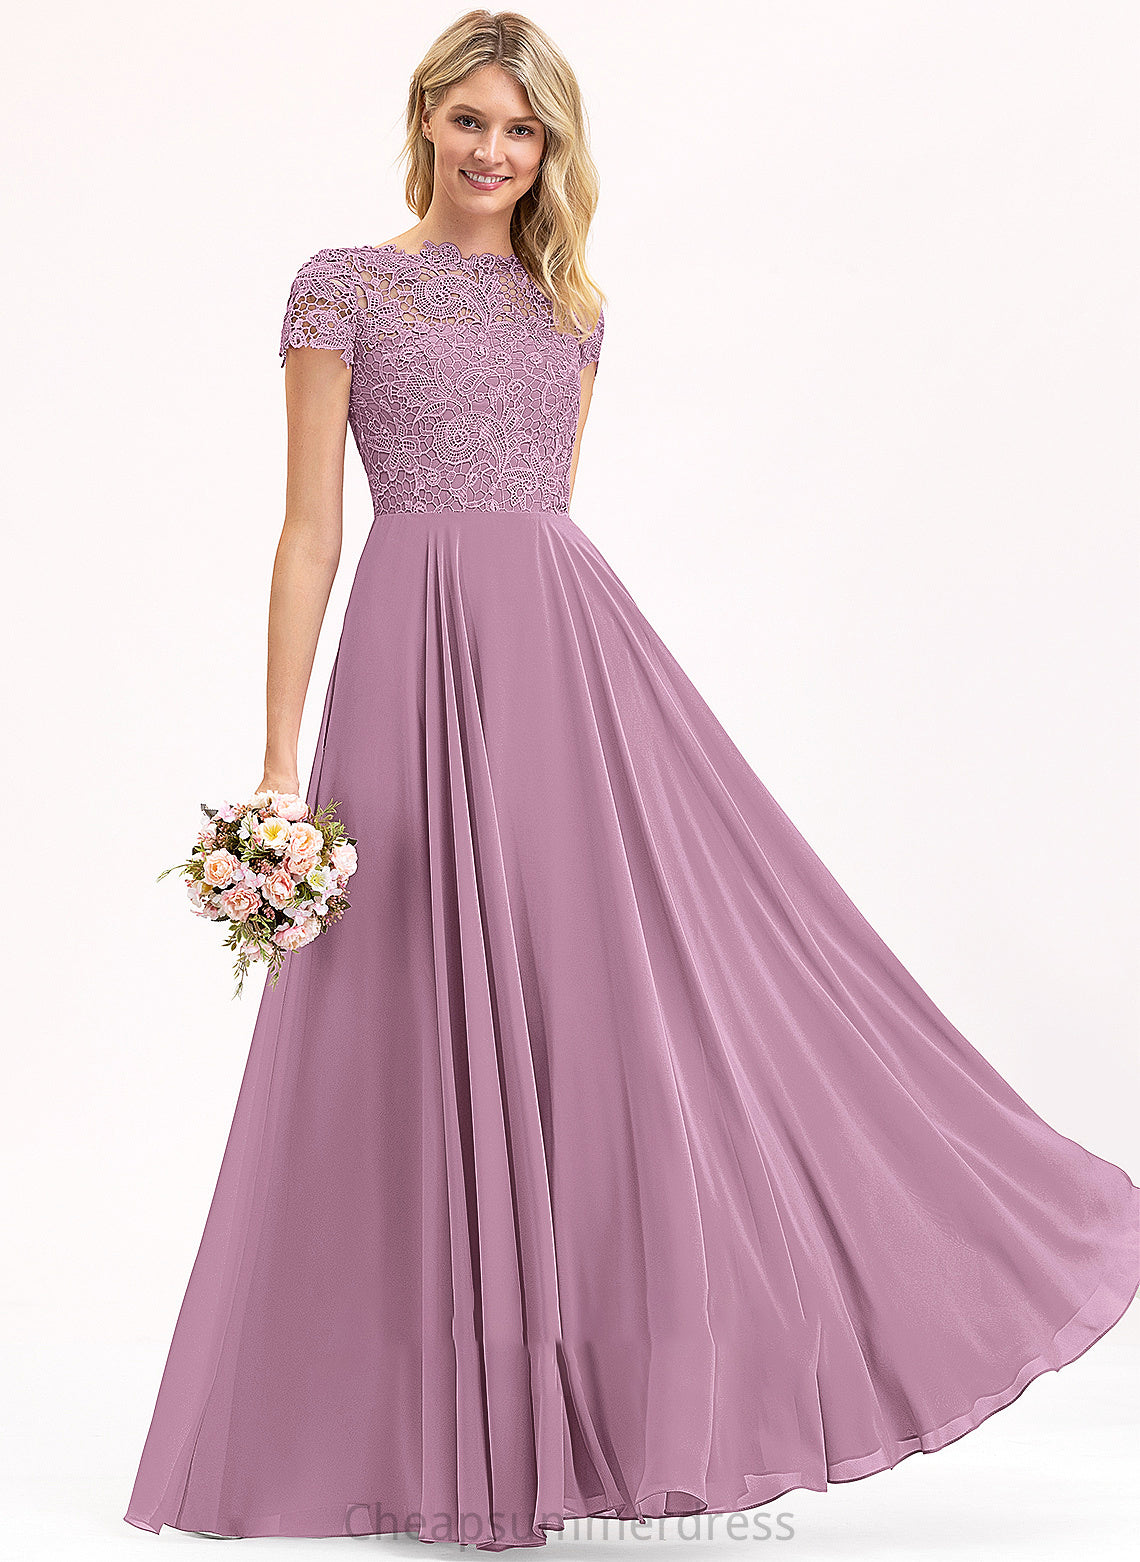 Floor-Length Prom Dresses A-Line Dalia Lace With Pockets Neck Chiffon Scoop